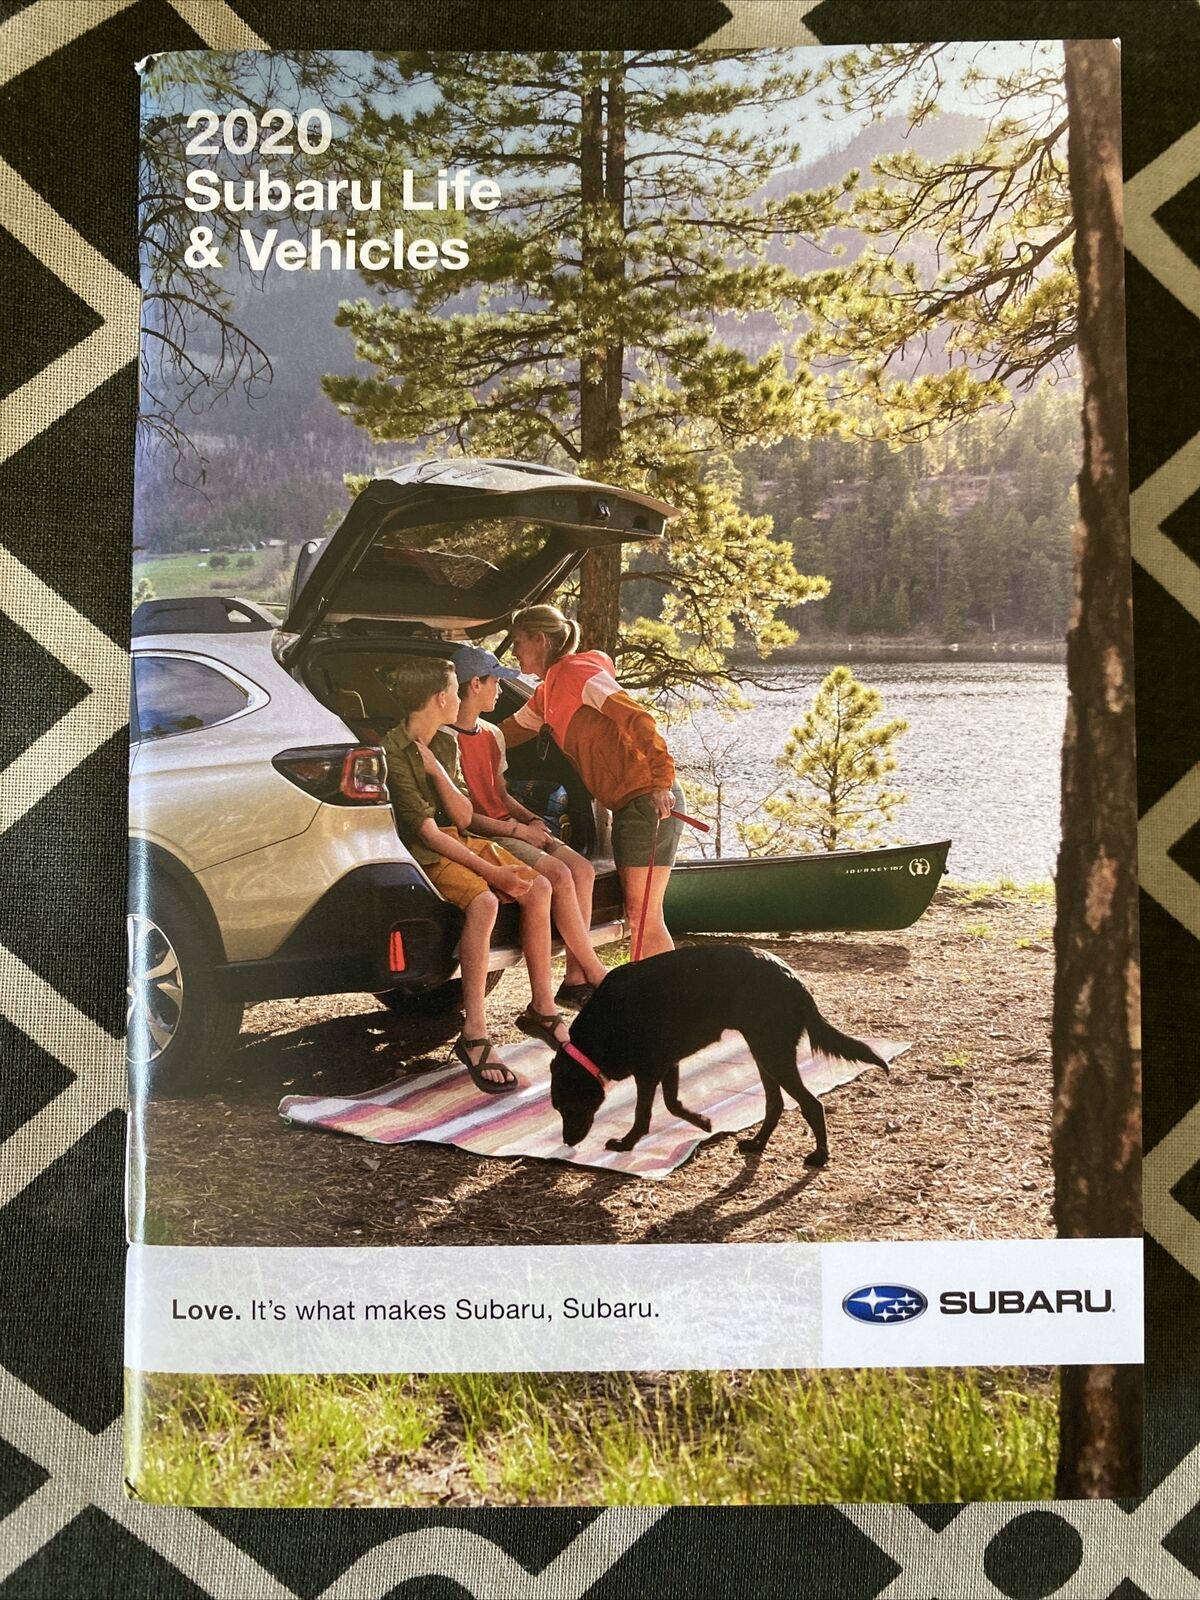 2020 Subaru Life & Vehicles Love Promise 48 Page Booklet, NEW 